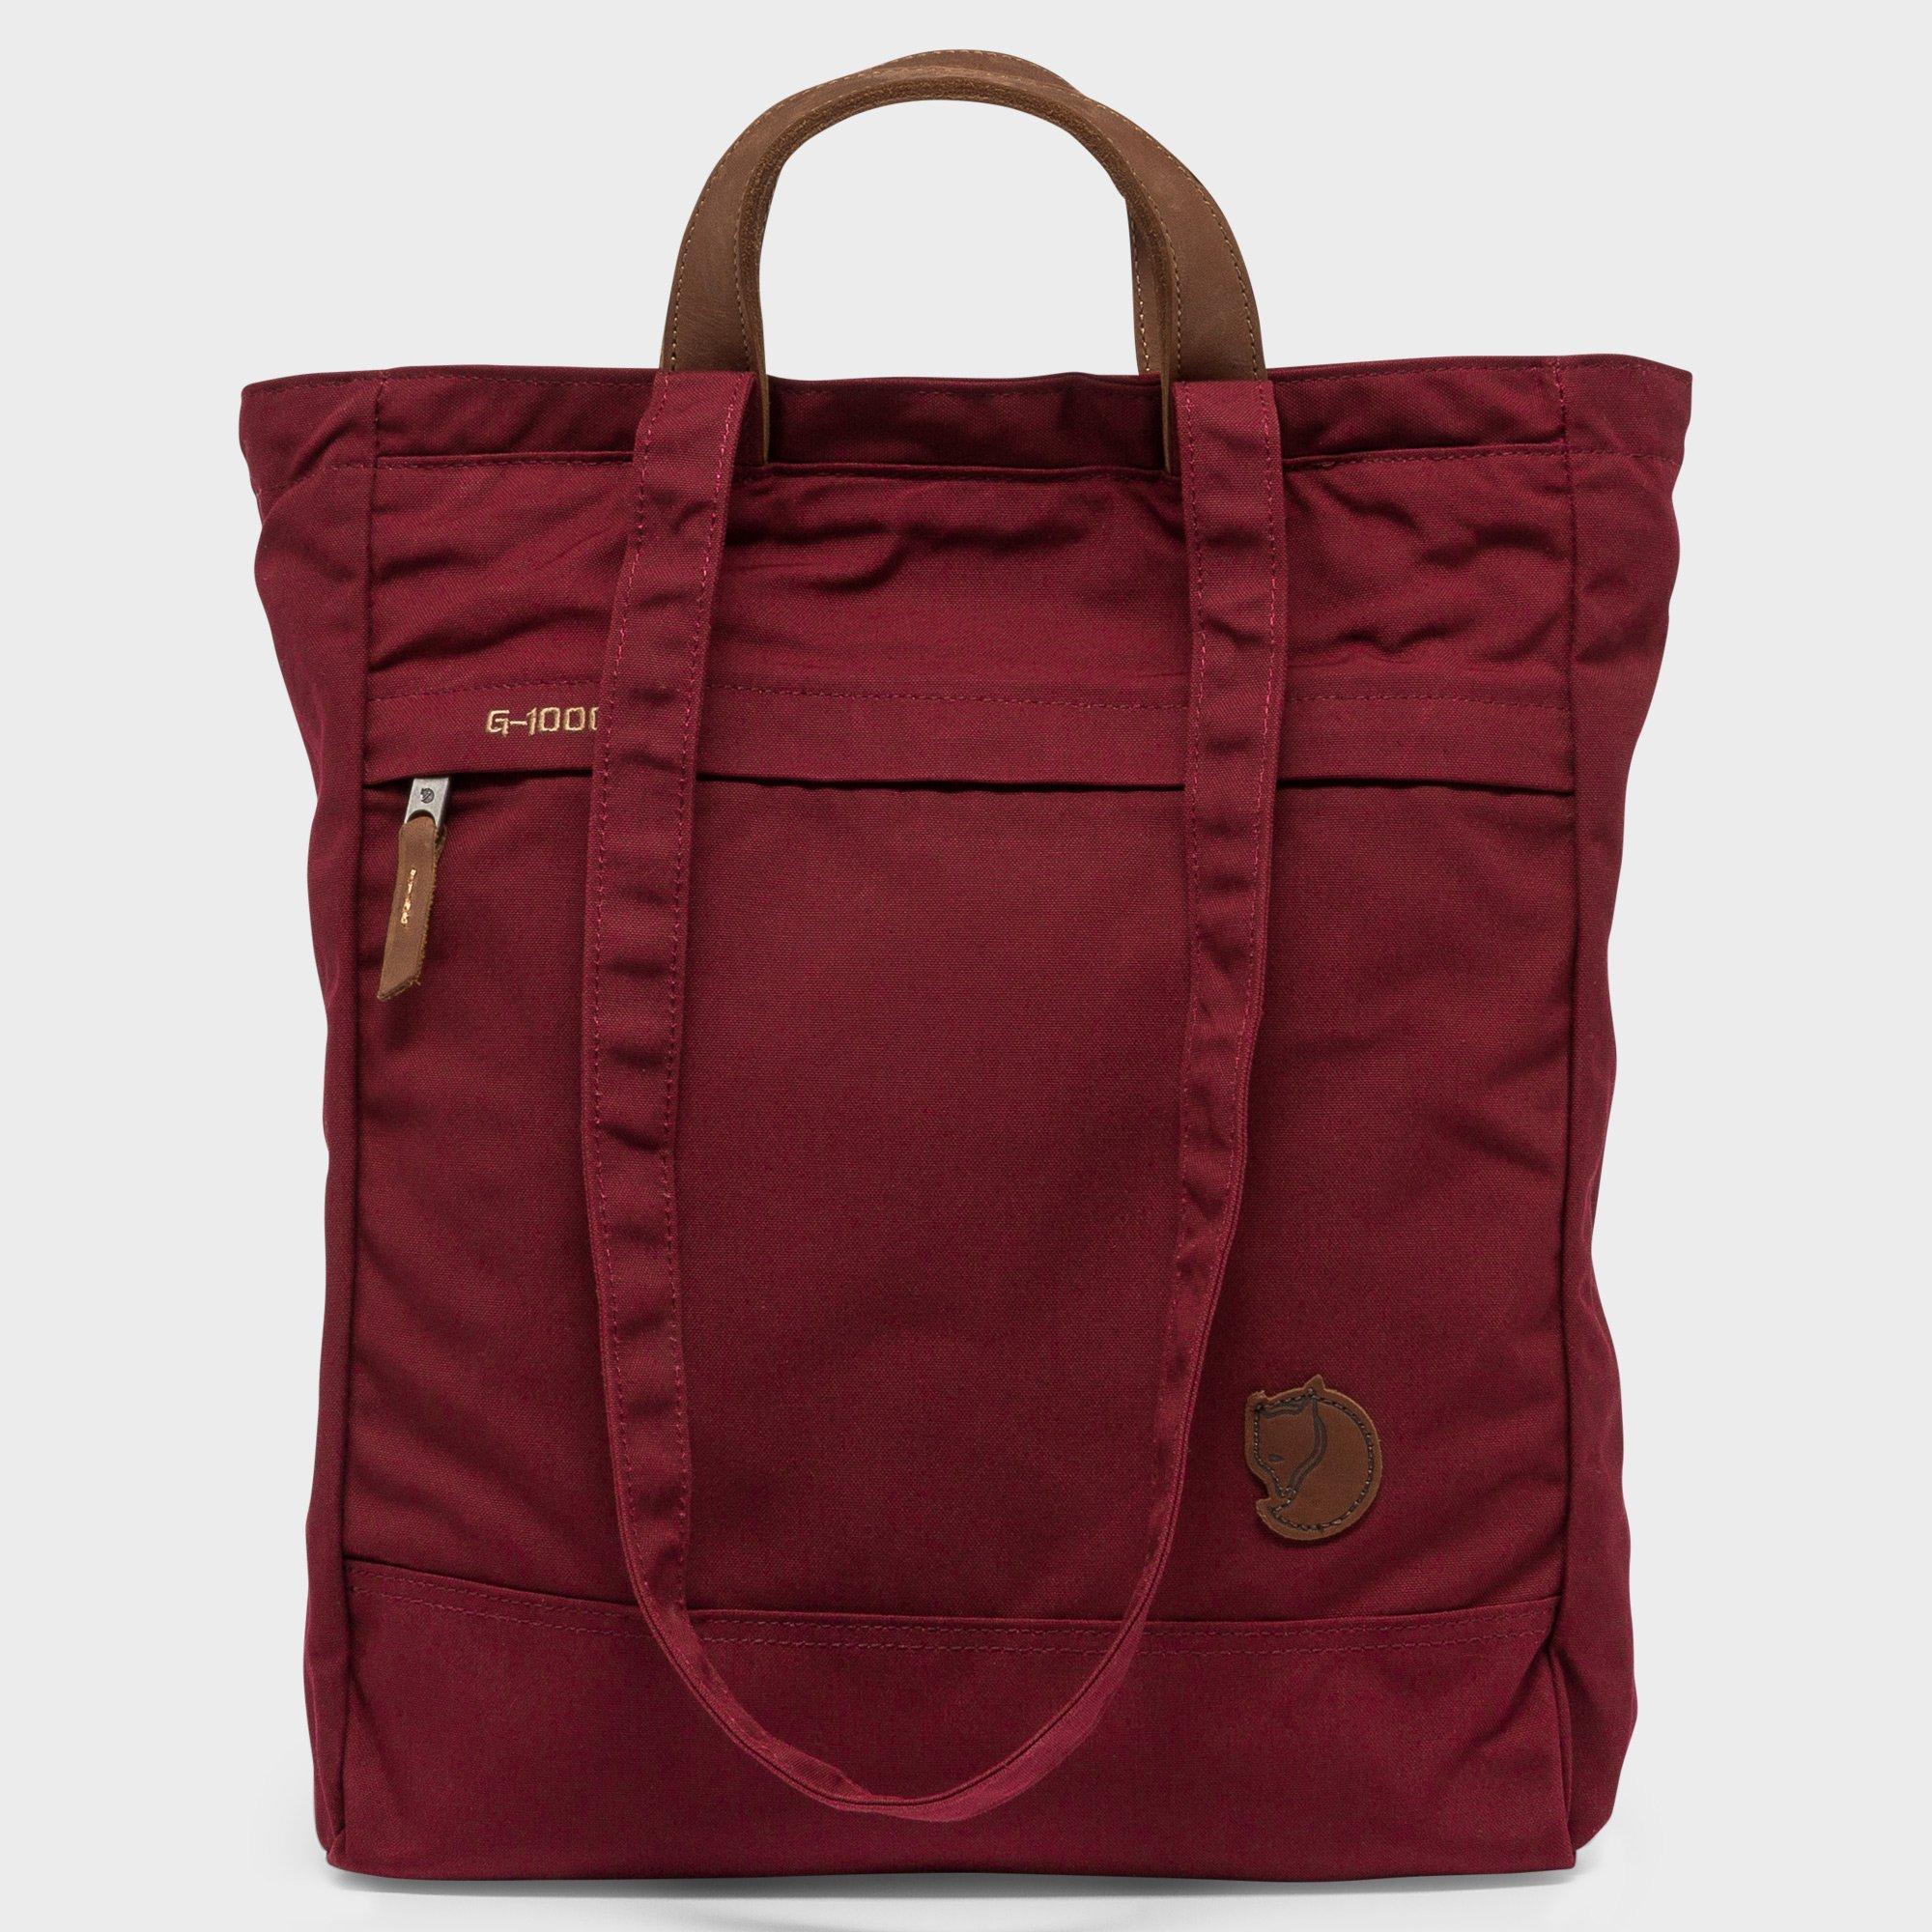 Image of FJALLRAVEN Totepack No. 1 Tote Bag - ONE SIZE